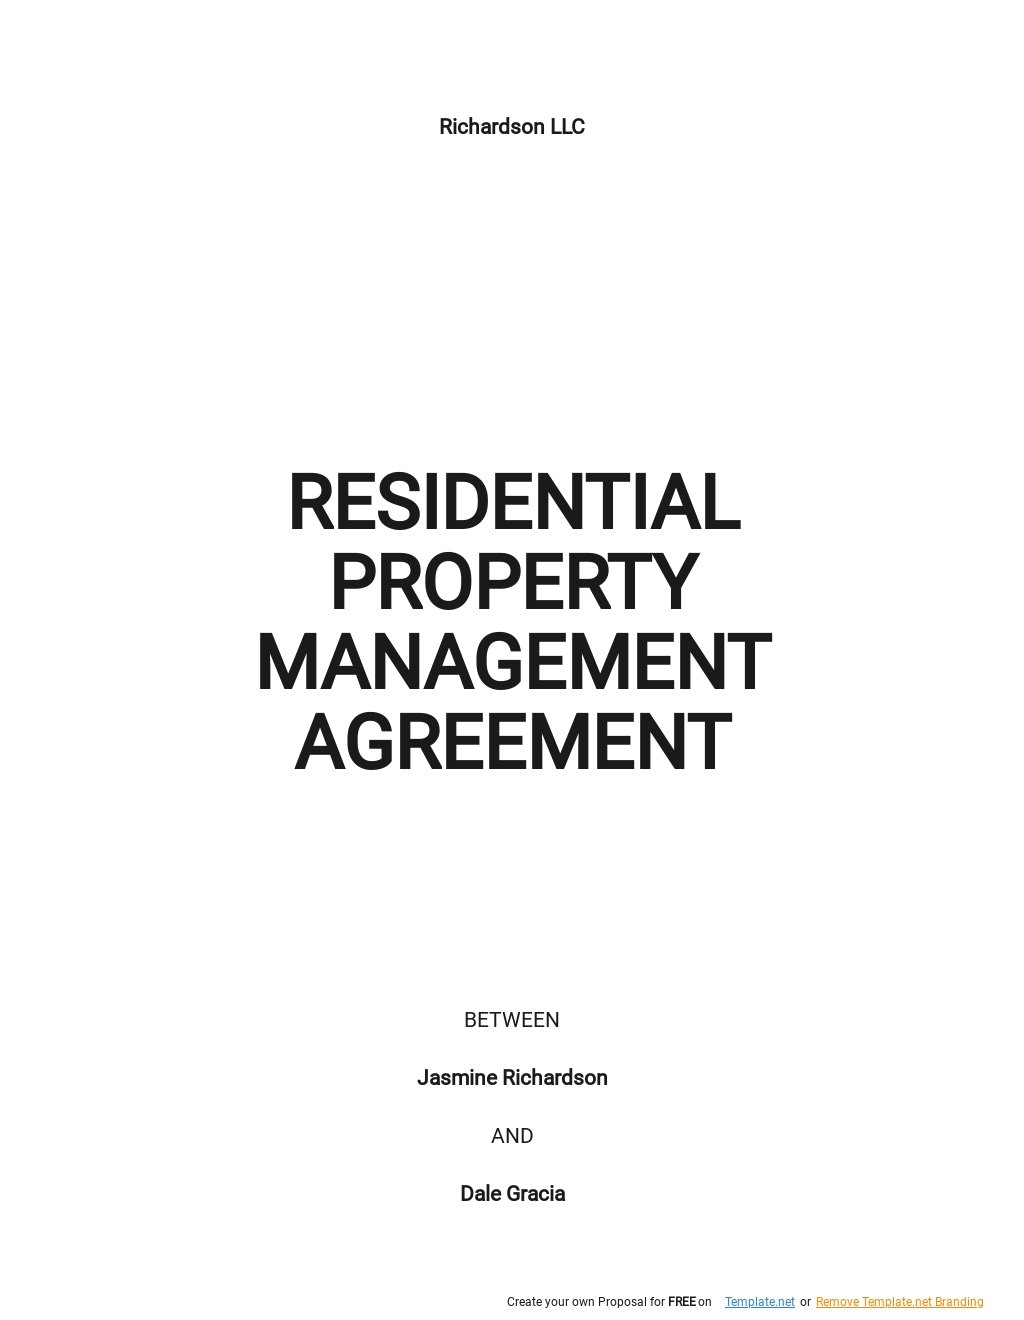 Residential Property Management Agreement Template.jpe